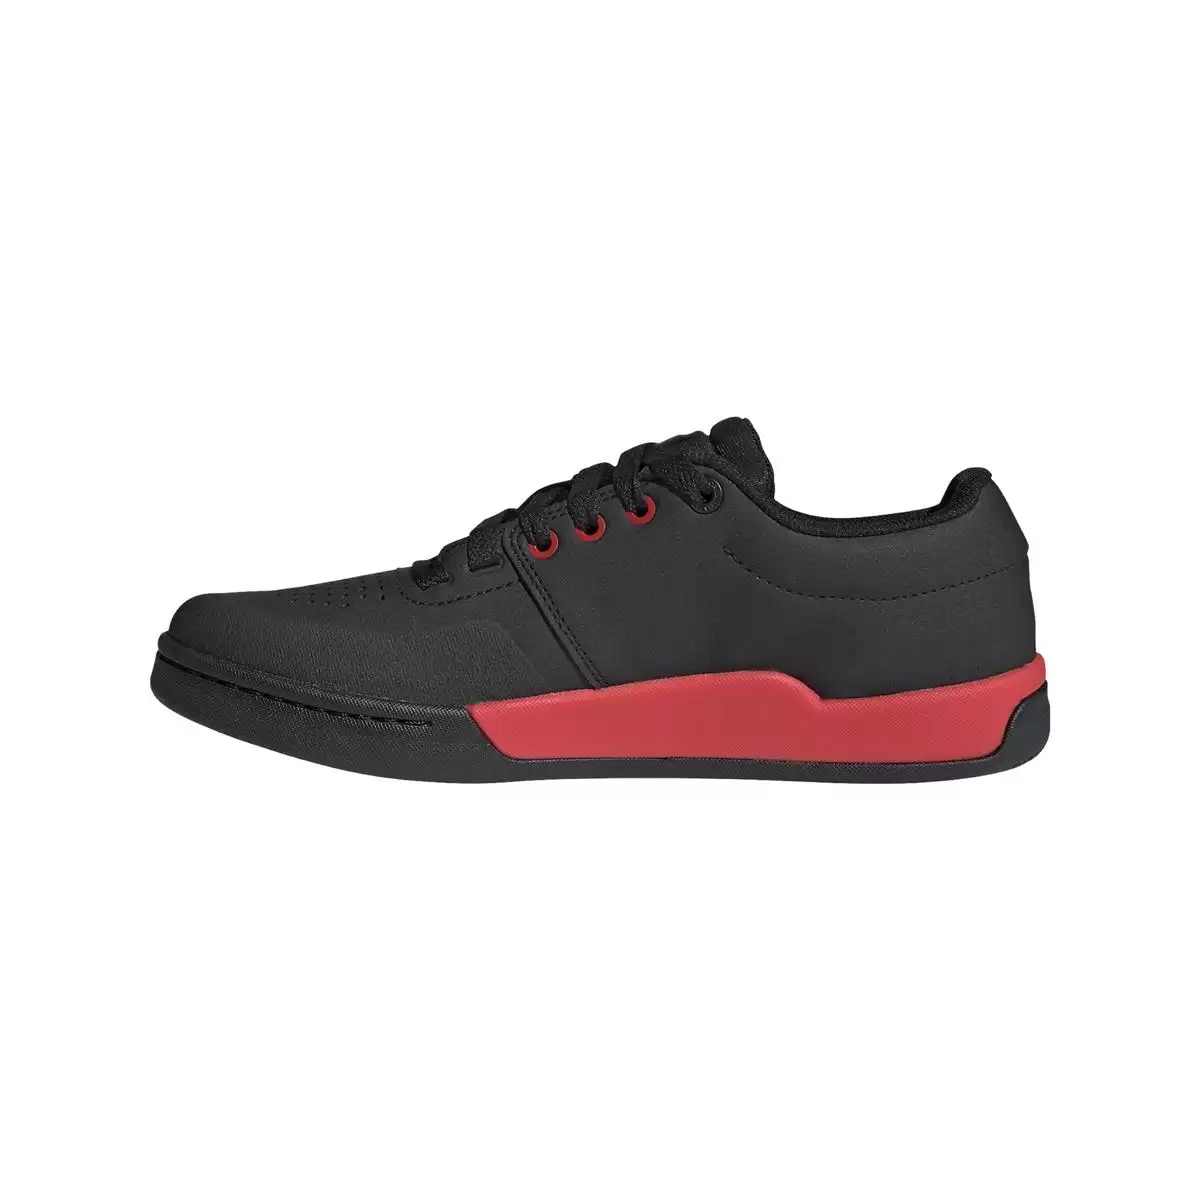 Chaussures Plates VTT Freerider Pro Noir/Rouge Taille 44 #3